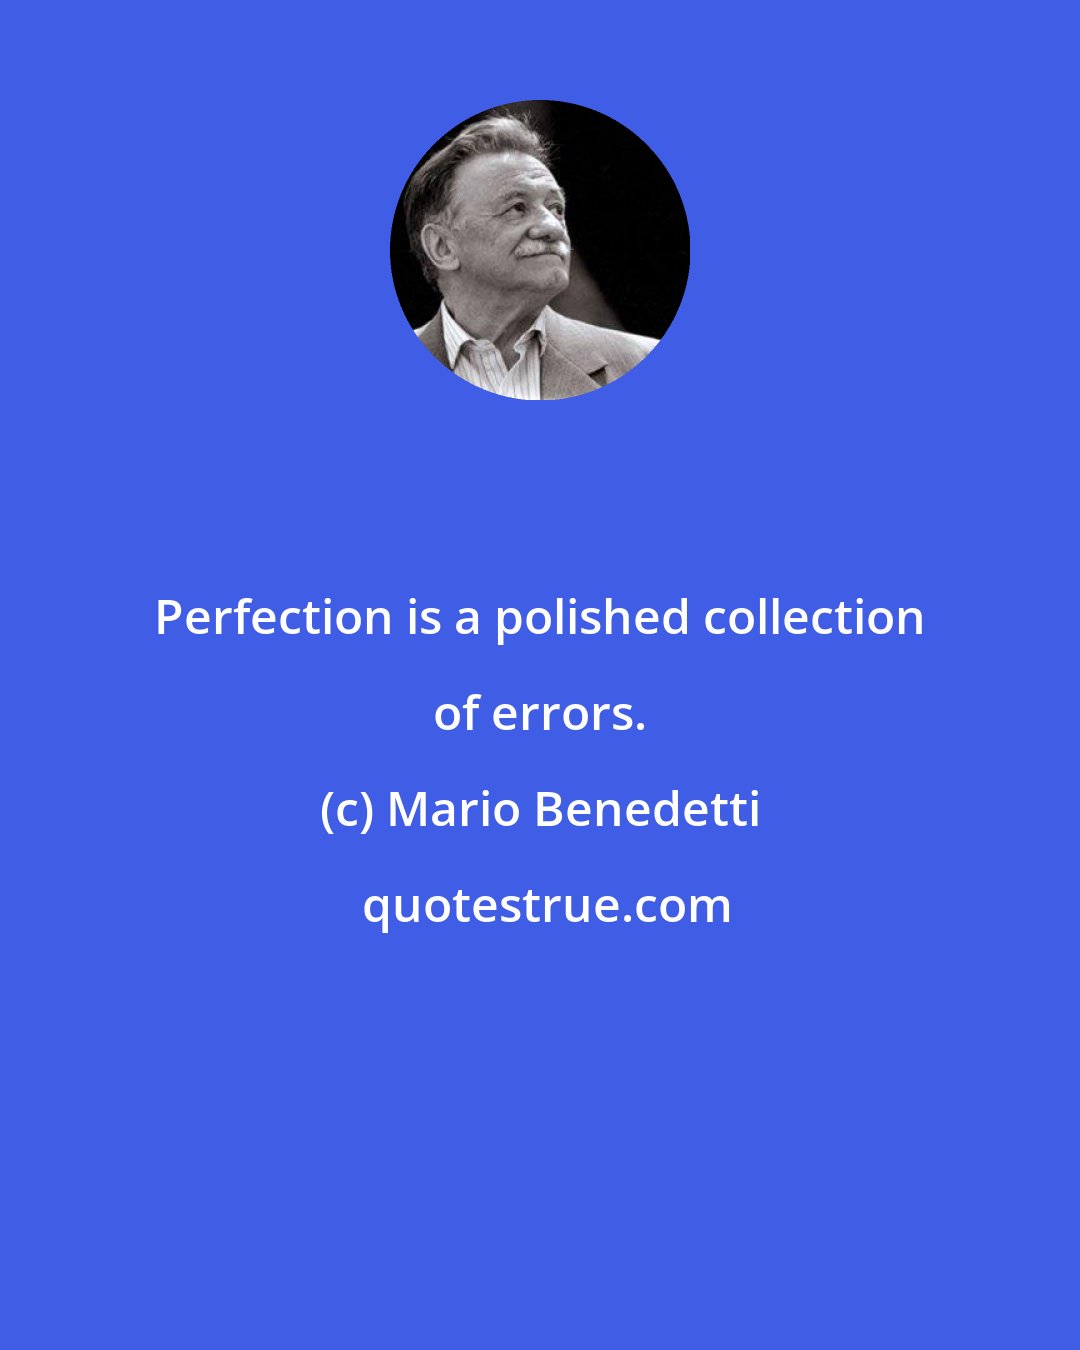 Mario Benedetti: Perfection is a polished collection of errors.